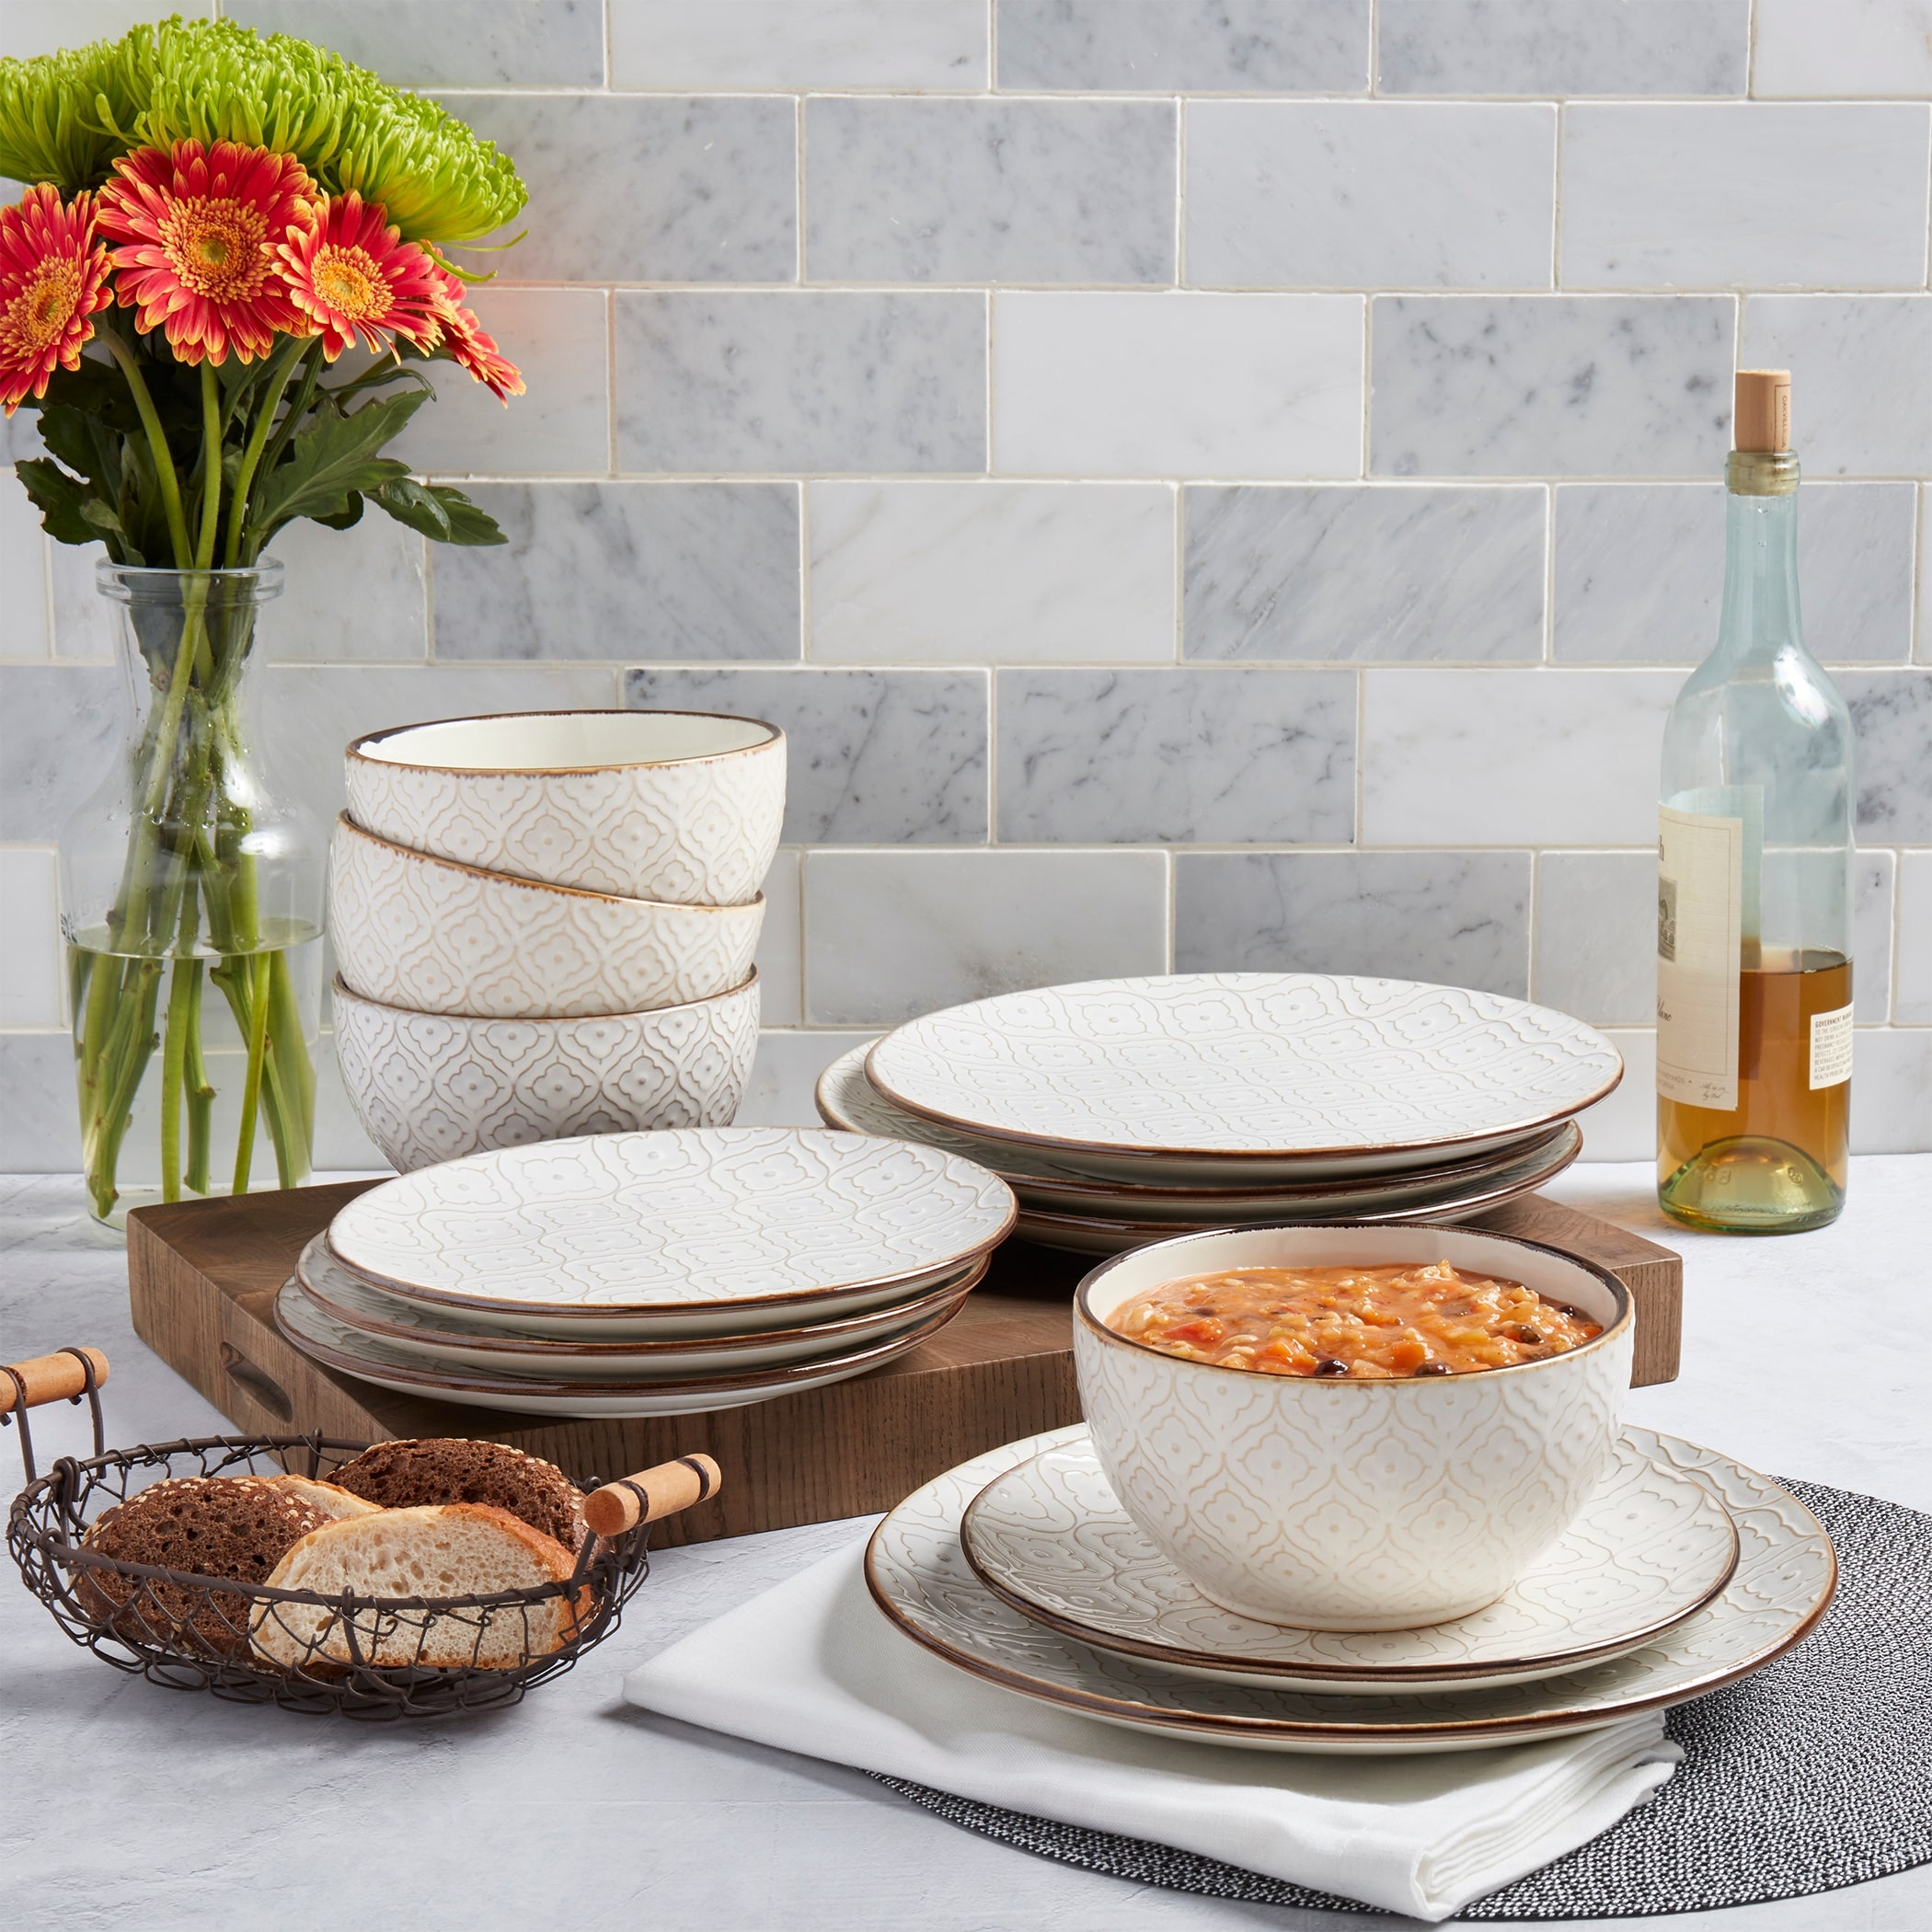 https://ak1.ostkcdn.com/images/products/is/images/direct/25afb4b64a9bbdad5b31d2ffbef447d383bd8a3c/Tabletops-Gallery-Sandra-12PC-Embossed-Ivory-Round-Dinnerware-Set.jpg